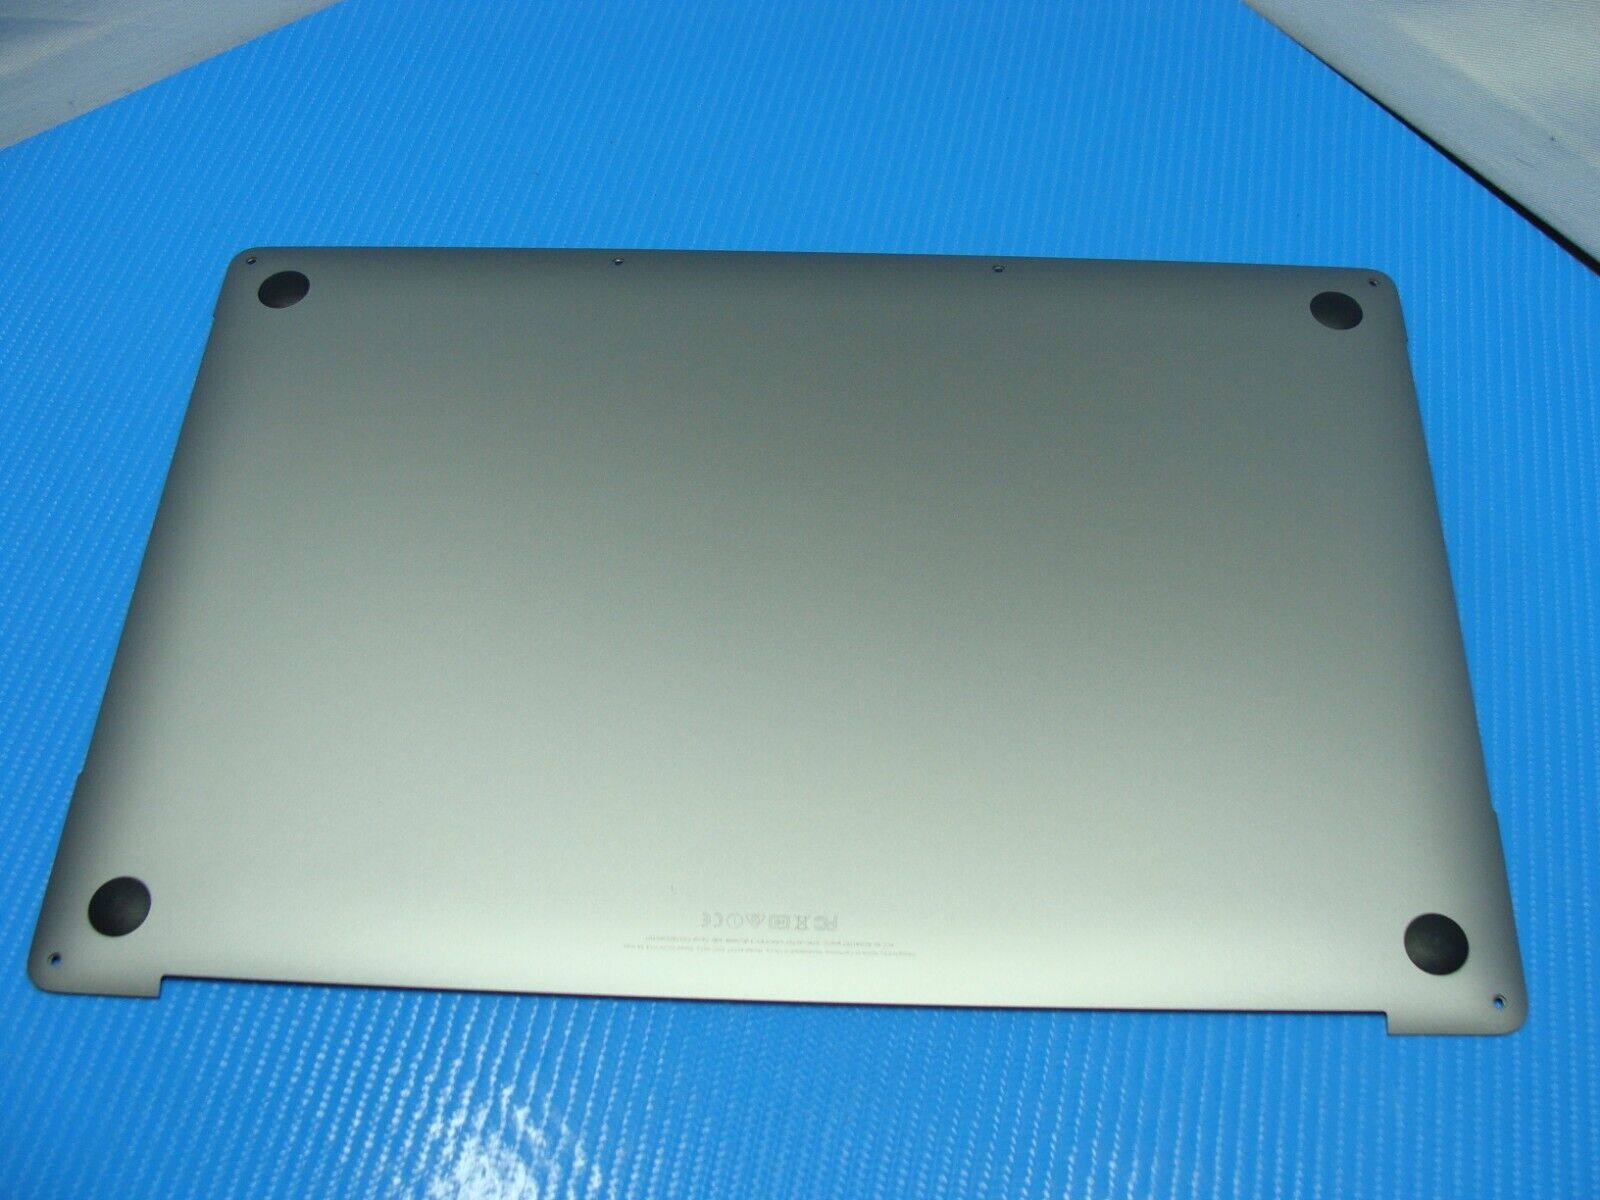 MacBook Pro A1707 15" Late 2016 MLH32LL/A OEM Bottom Case Space Gray 923-01456